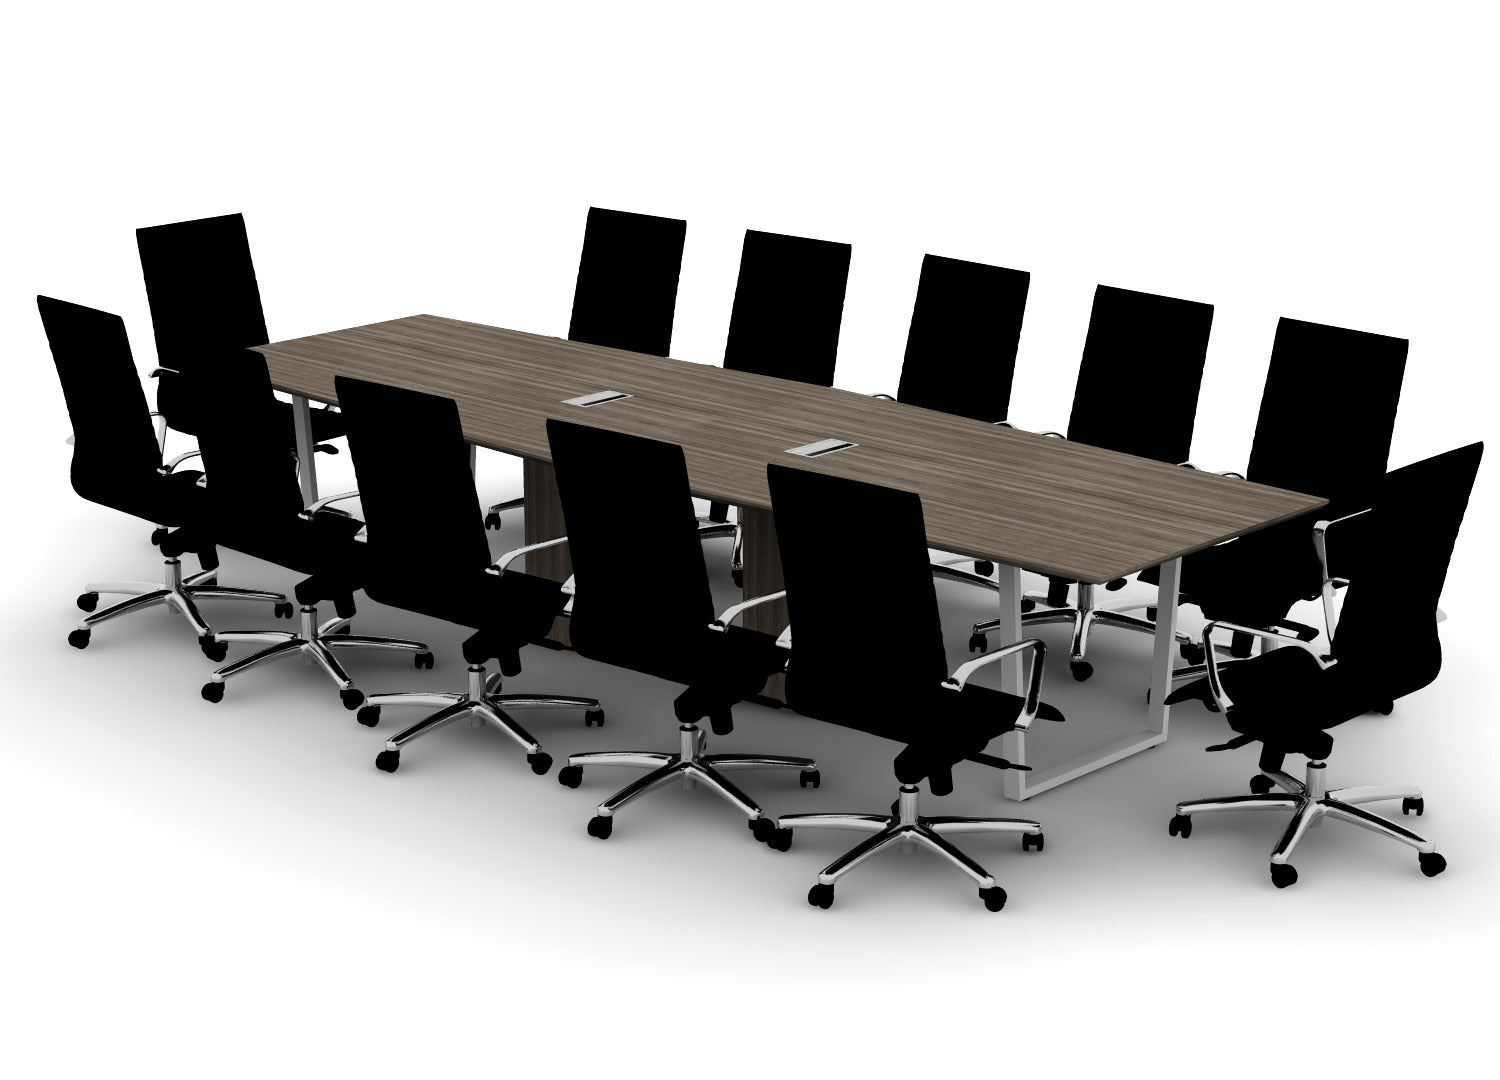 48" x 144" Conference Room (Seats 12)